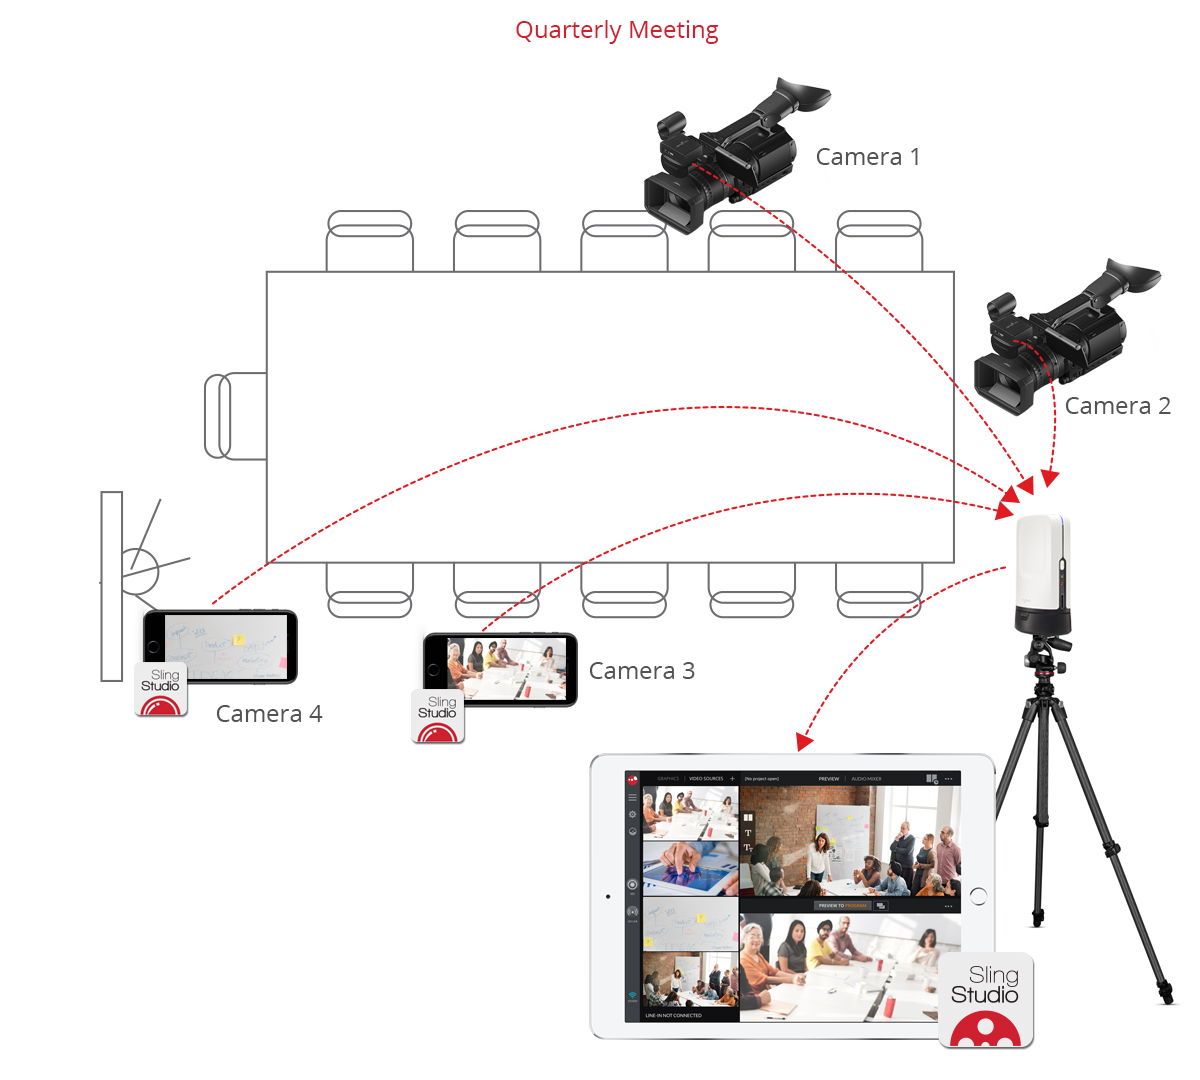 Diagram on how to live stream                                                                        meetings and other corporate events                                                                       with SlingStudio video switcher